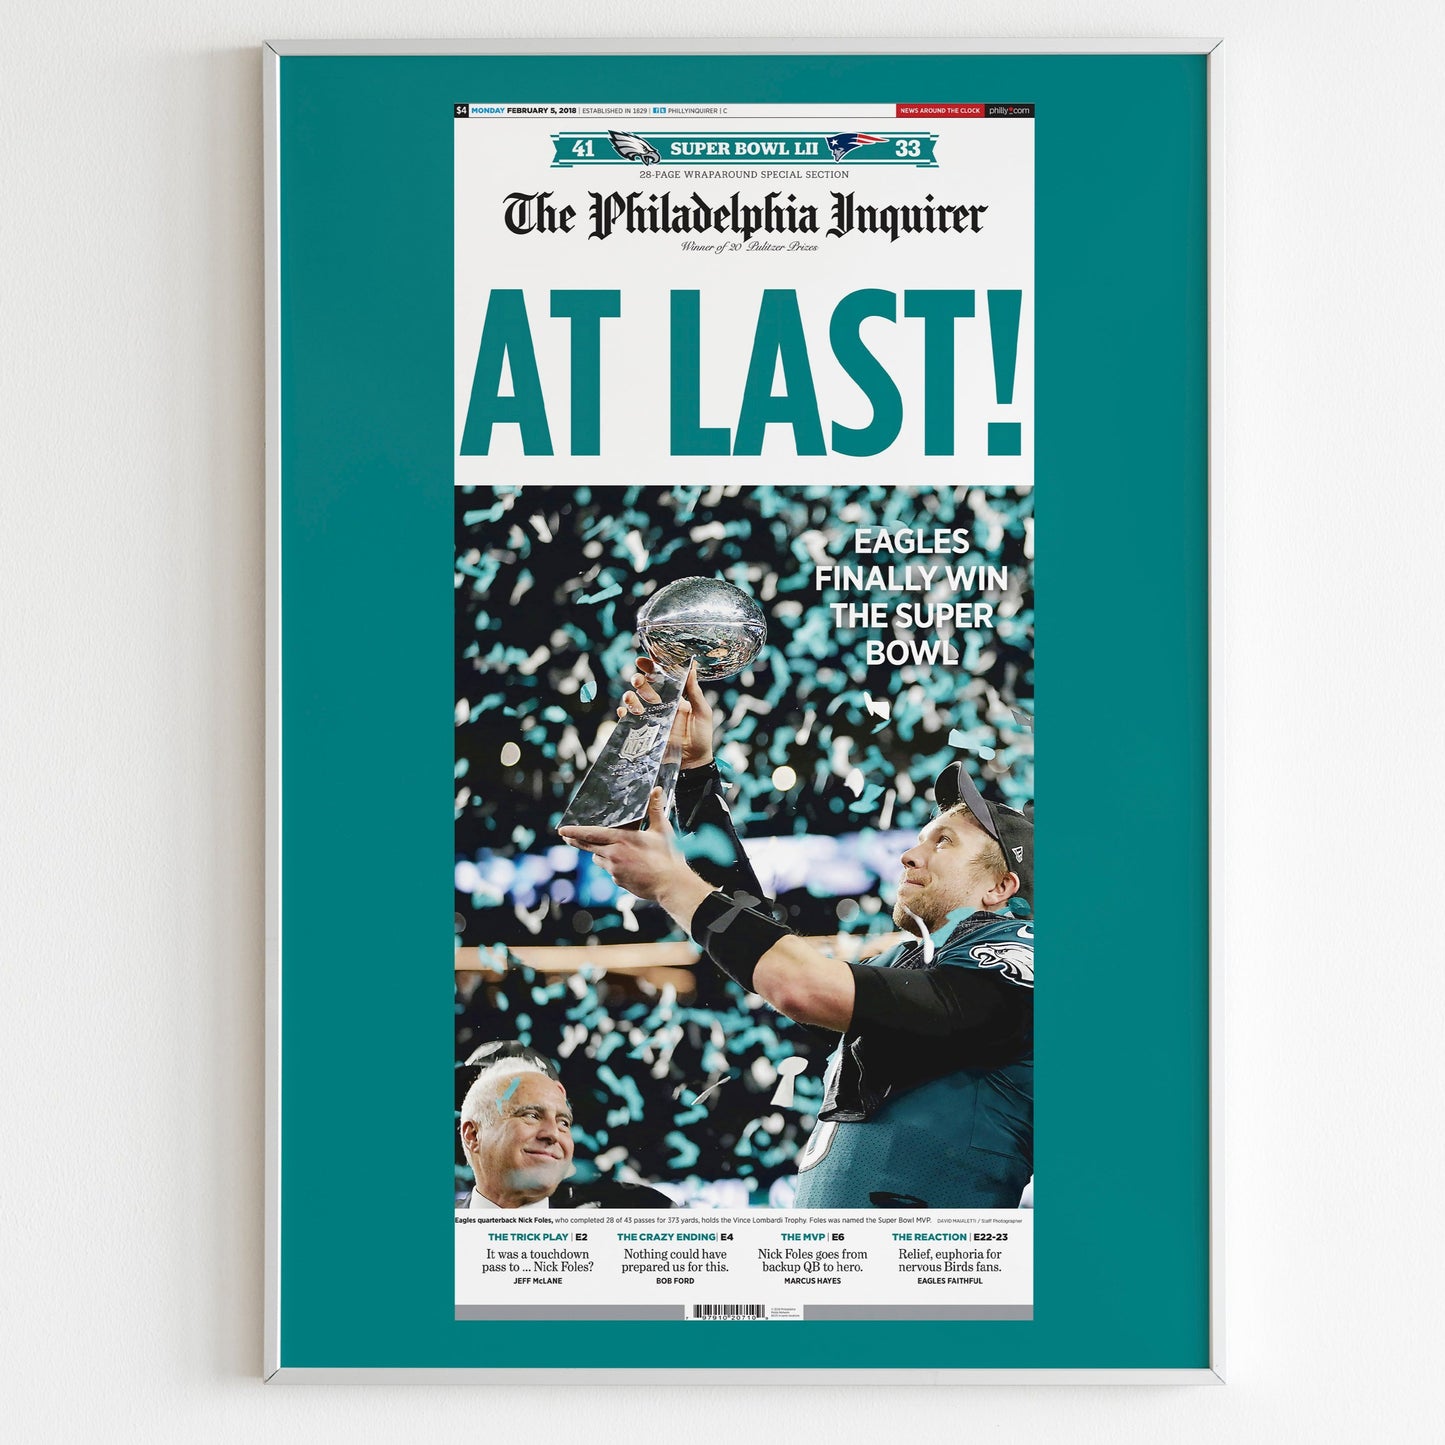 Philadelphia Eagles 2018 Super Bowl NFL Champions Front Cover The Philadelphia Inquirer Newspaper Poster, Football Team Magazine Page Print